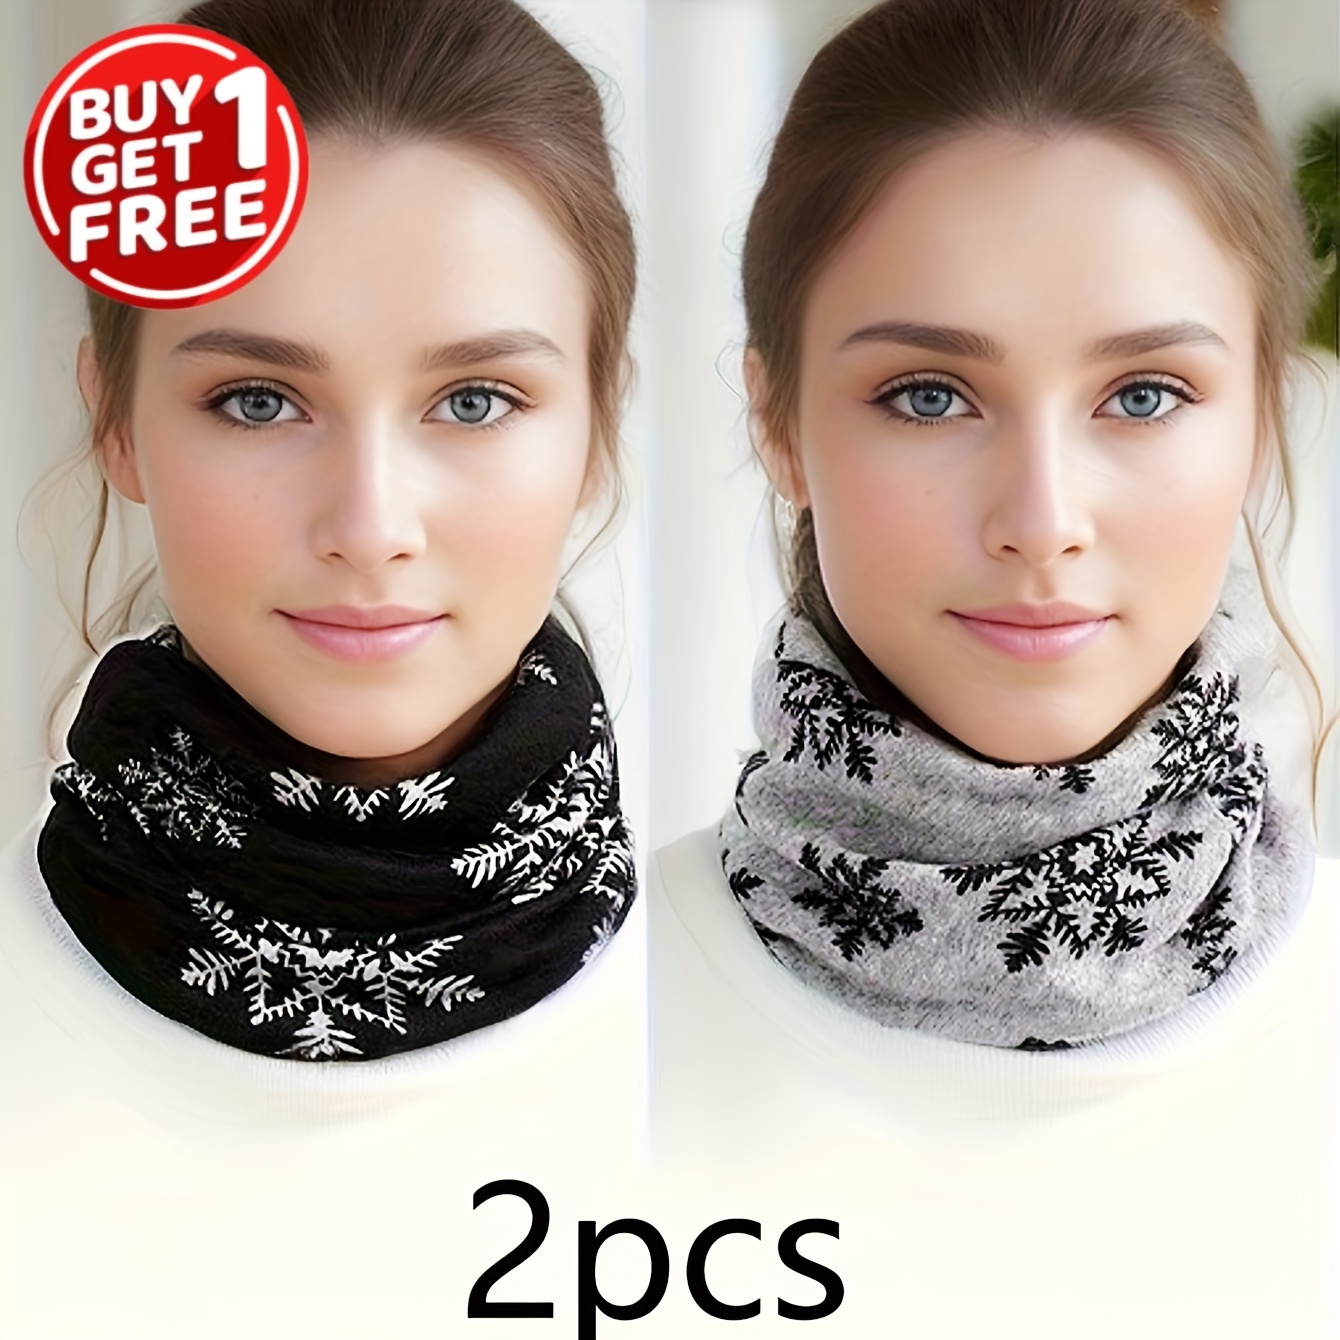 

2pcs Vintage Snowflake Pattern Neck Gaiter Set Boho Soft Warm Elastic Hats Winter Outdoor Windproof Coldproof Neck Cover